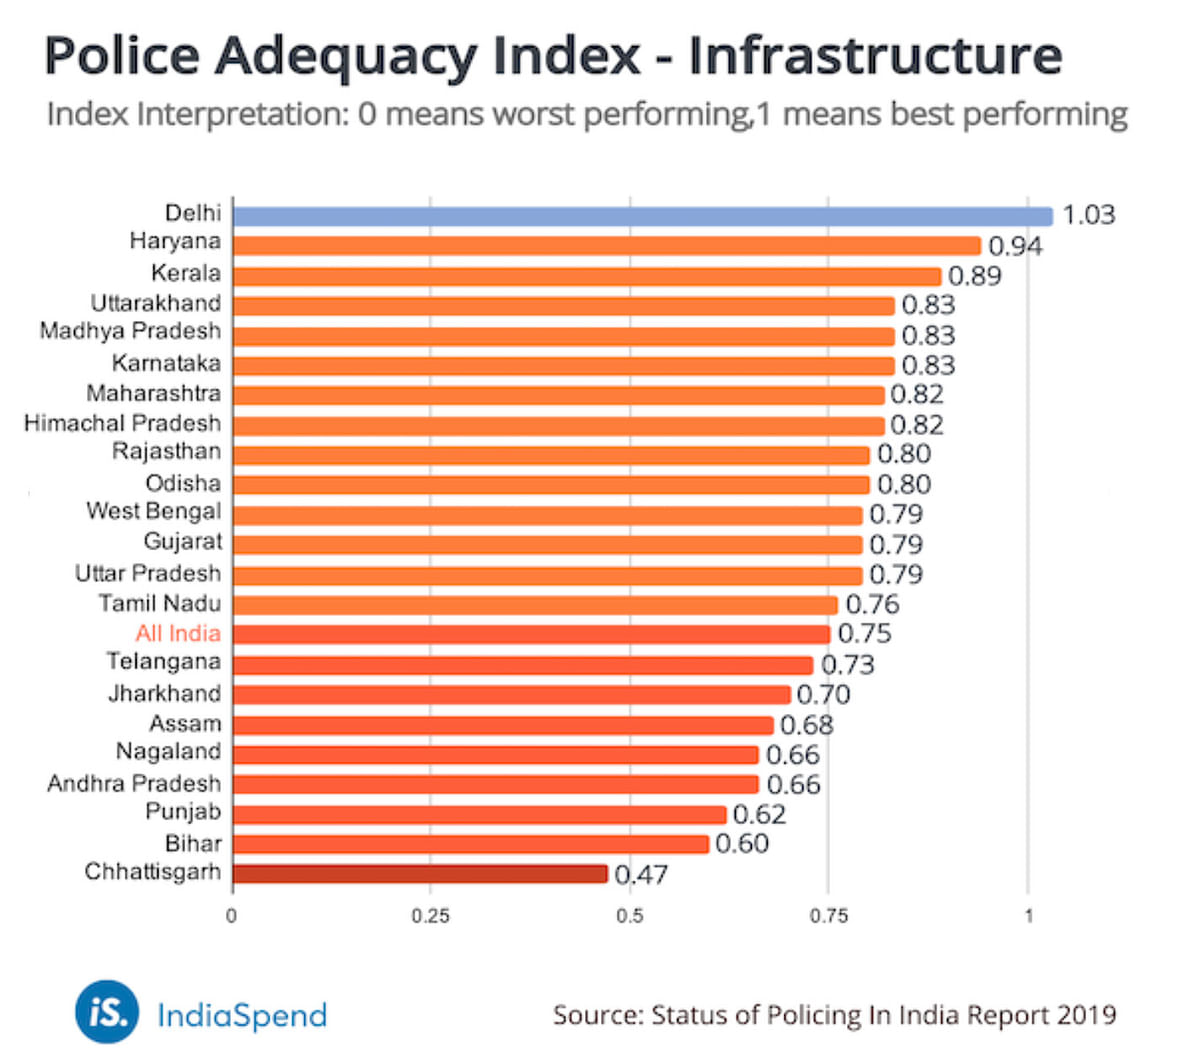 Study shows that Delhi police are the best in terms of staffing and infrastructure in an analysis of 22 states.